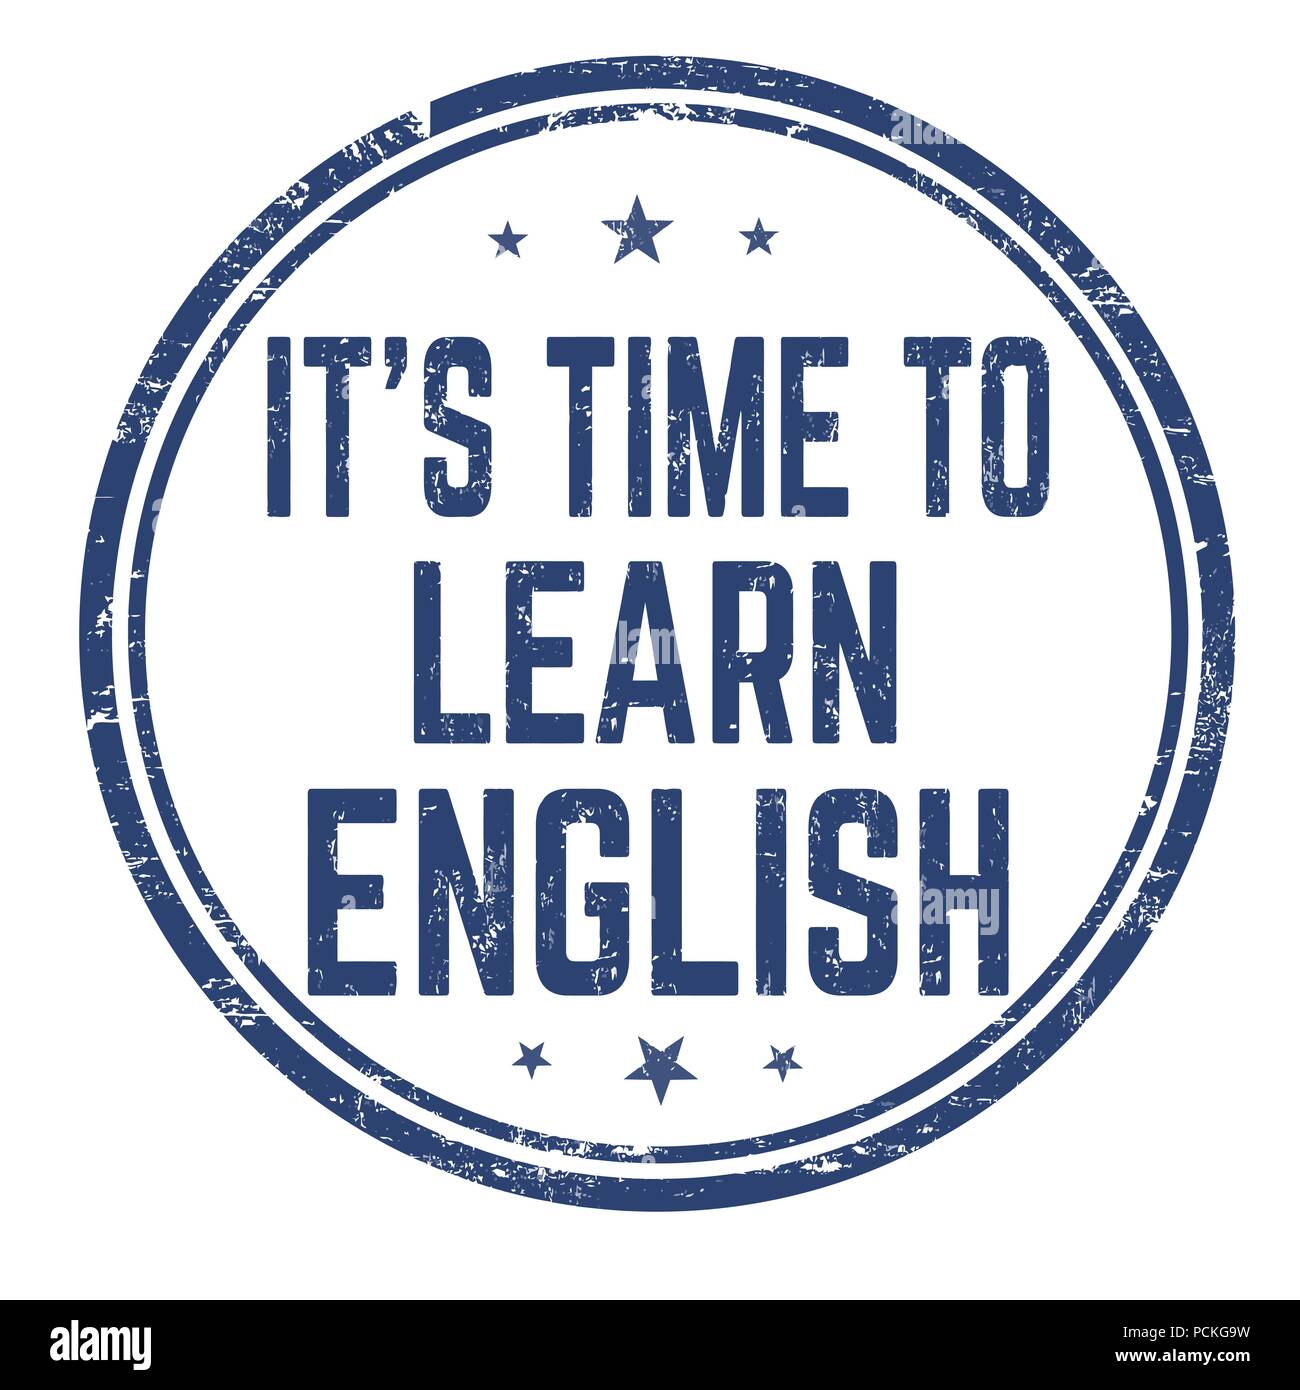 Its время. Its time to learn English. Its time to learn English картинки. Штамп learn English. Надпись English time.